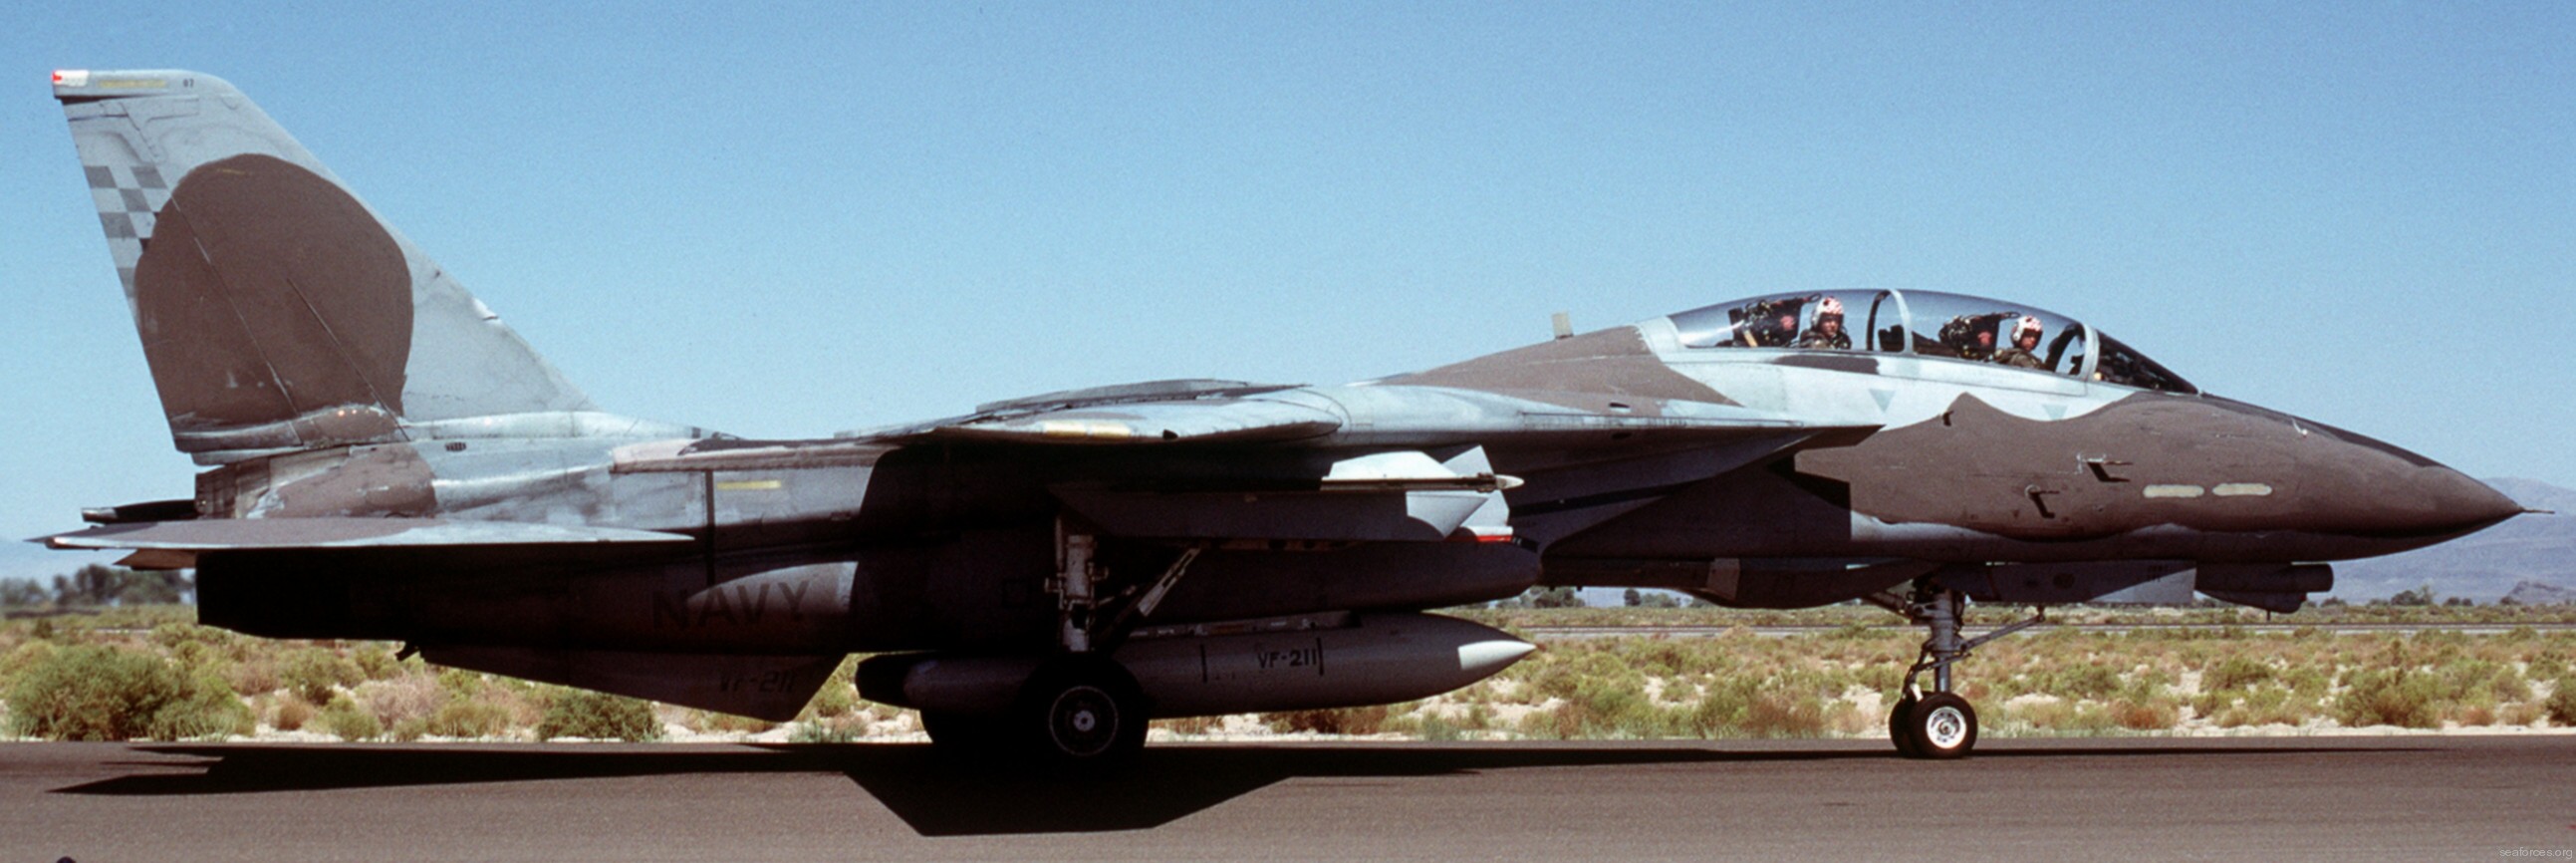 vf-211 fighting checkmates fighter squadron f-14a tomcat us navy carrier air wing cvw-9 nas fallon nevada specia camouflage